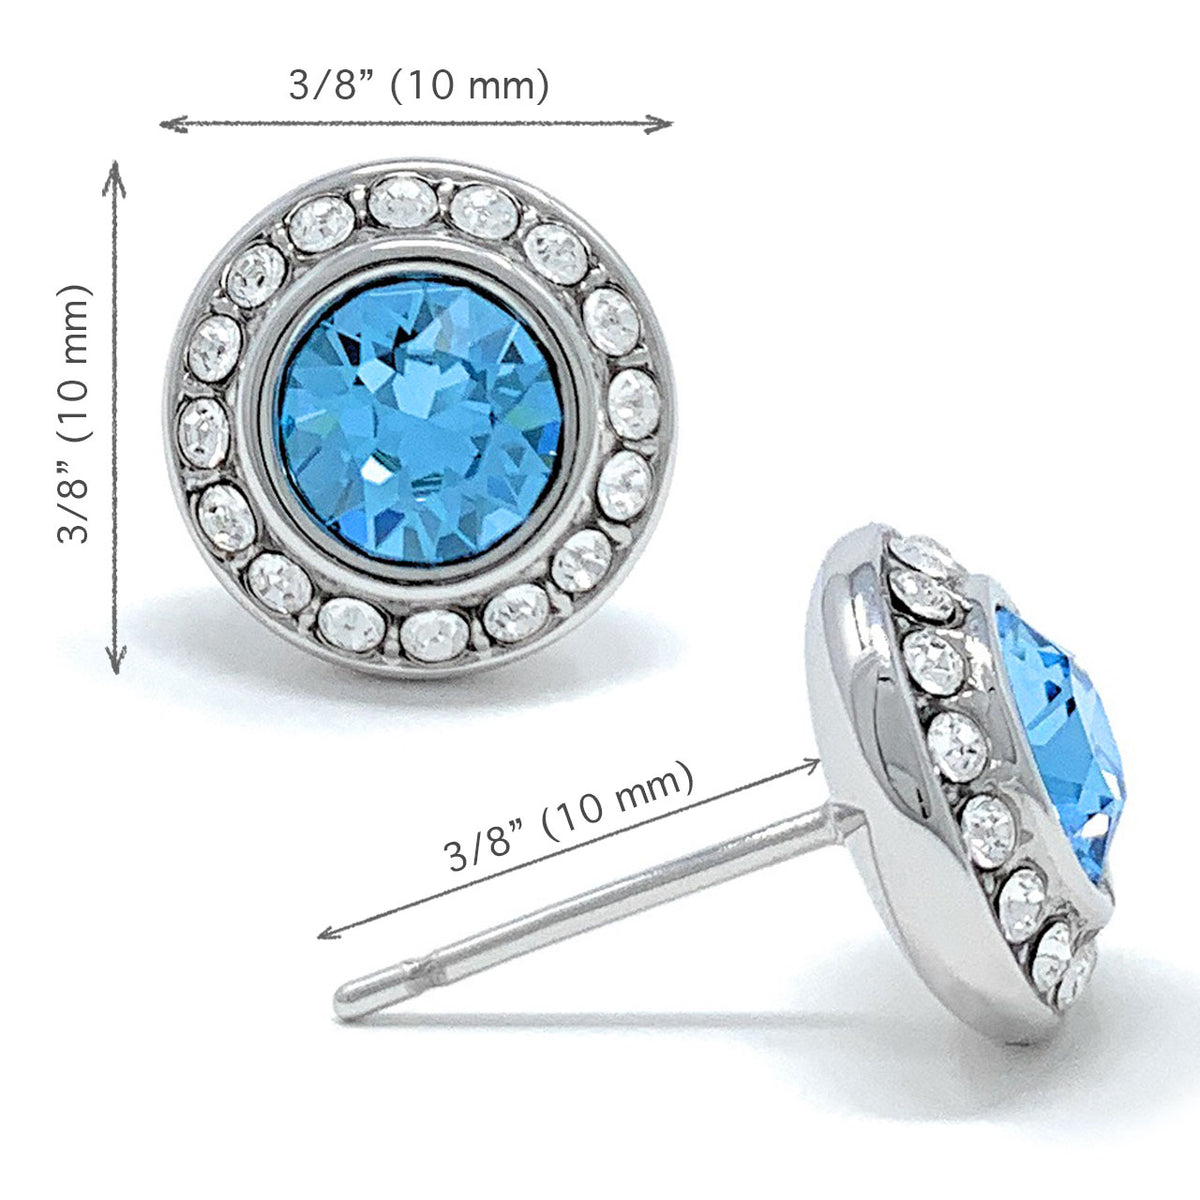 Halo Pave Stud Earrings with Blue Aquamarine Round Crystals from Swarovski Silver Toned Rhodium Plated - Ed Heart